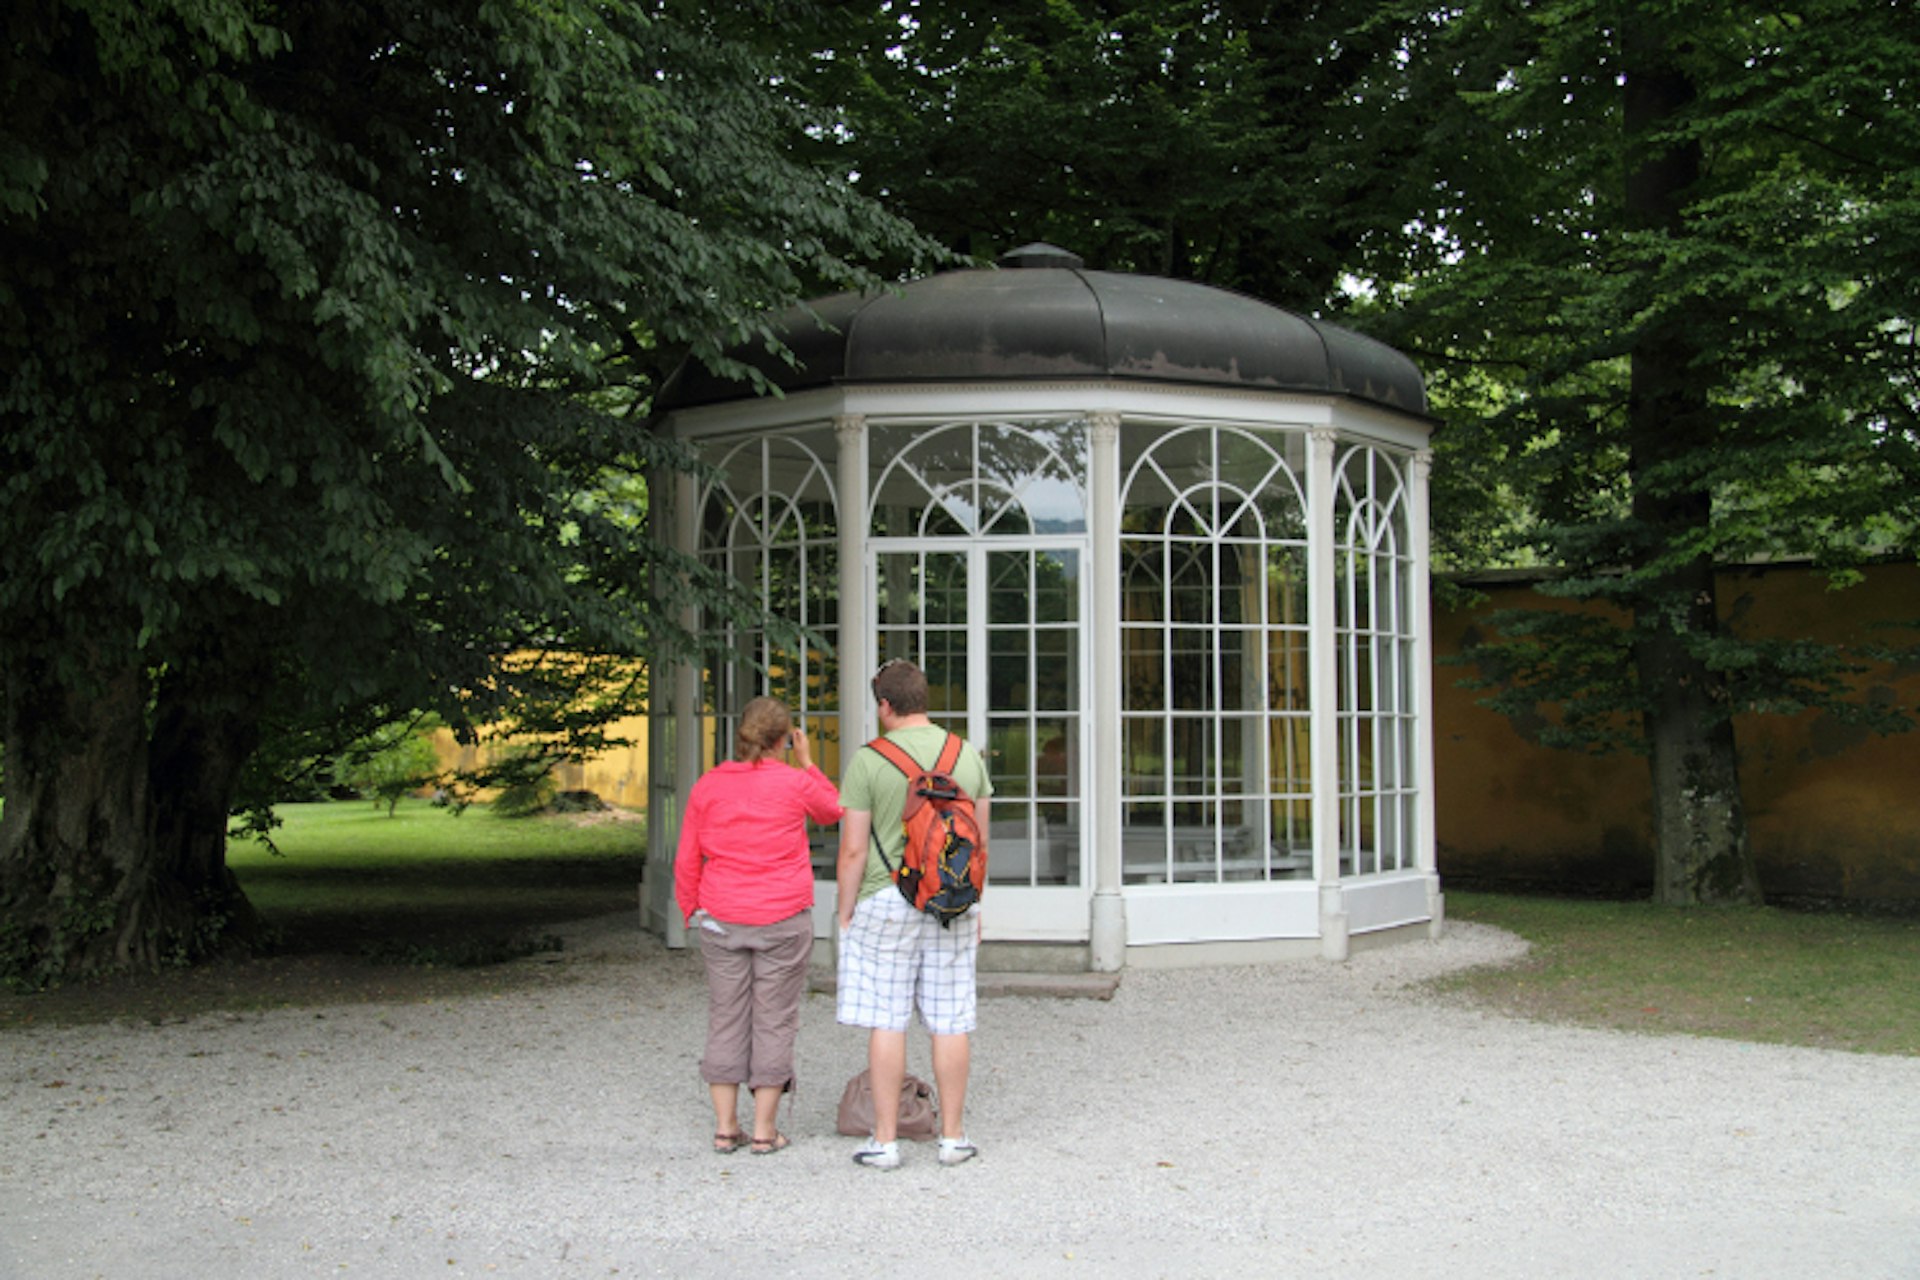 Features - Young Couple infront of the Sound of music Pavilion, Hellbrunn Palace Park